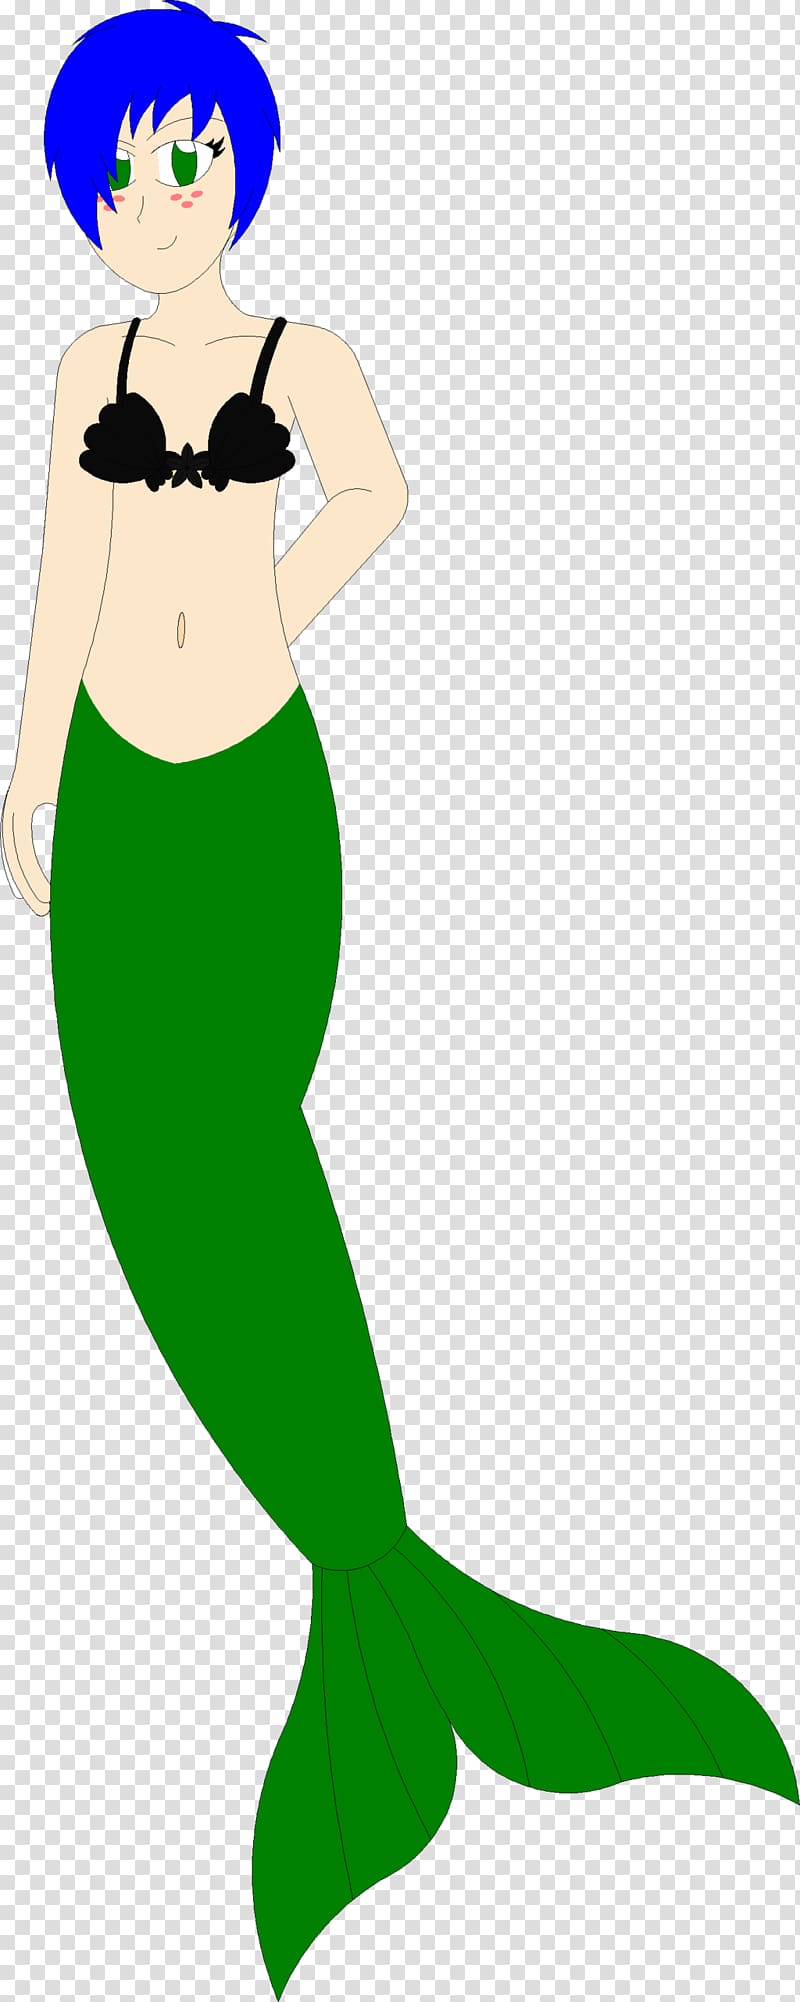 Mermaid Cartoon Tail Legendary creature , mermaid tail transparent background PNG clipart